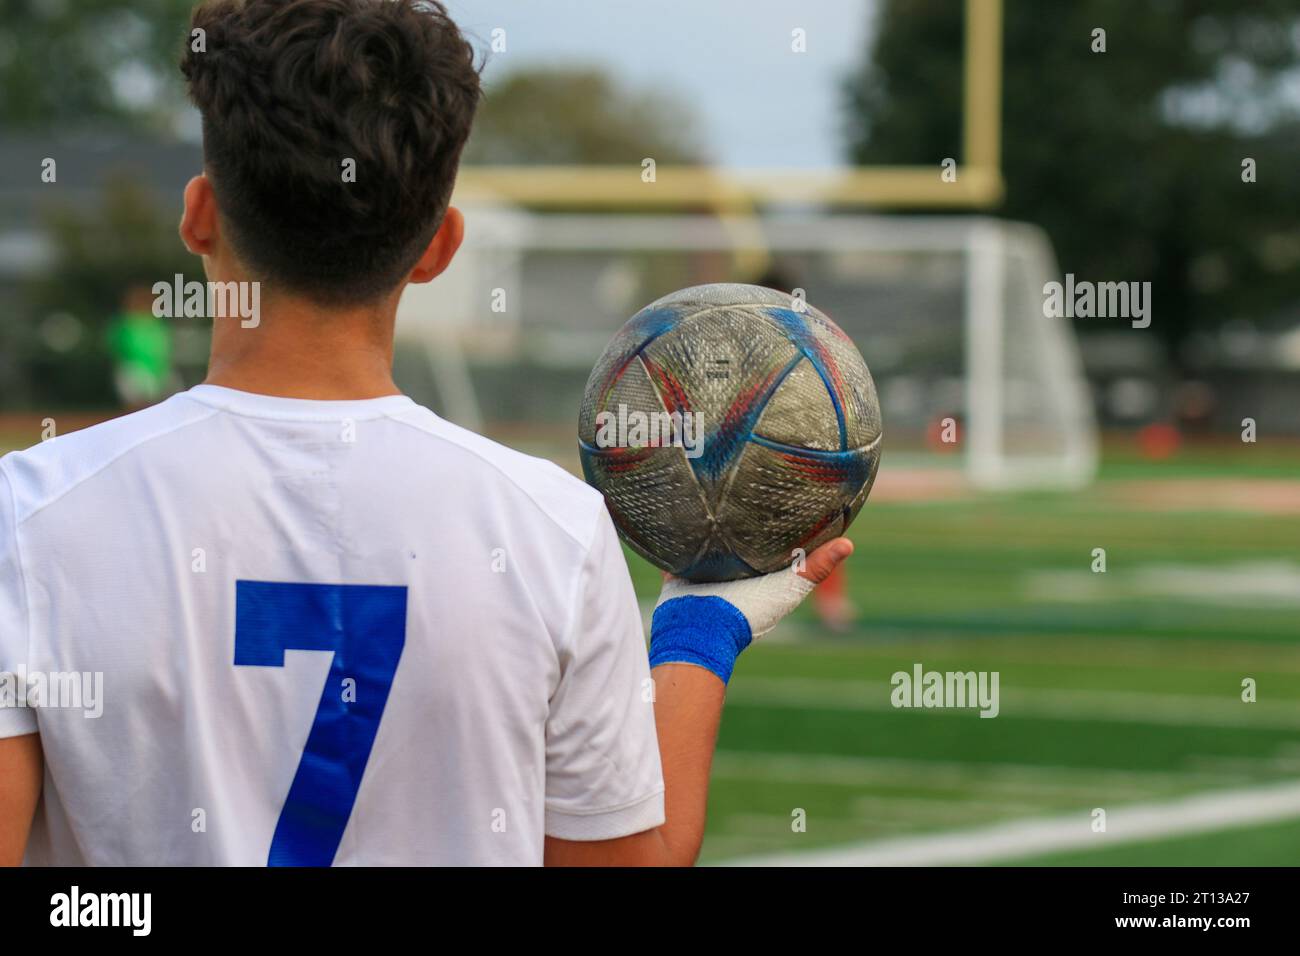 Rear view of a high school soccer player holding the ball in one hand ready for a throw in during a match. Stock Photo